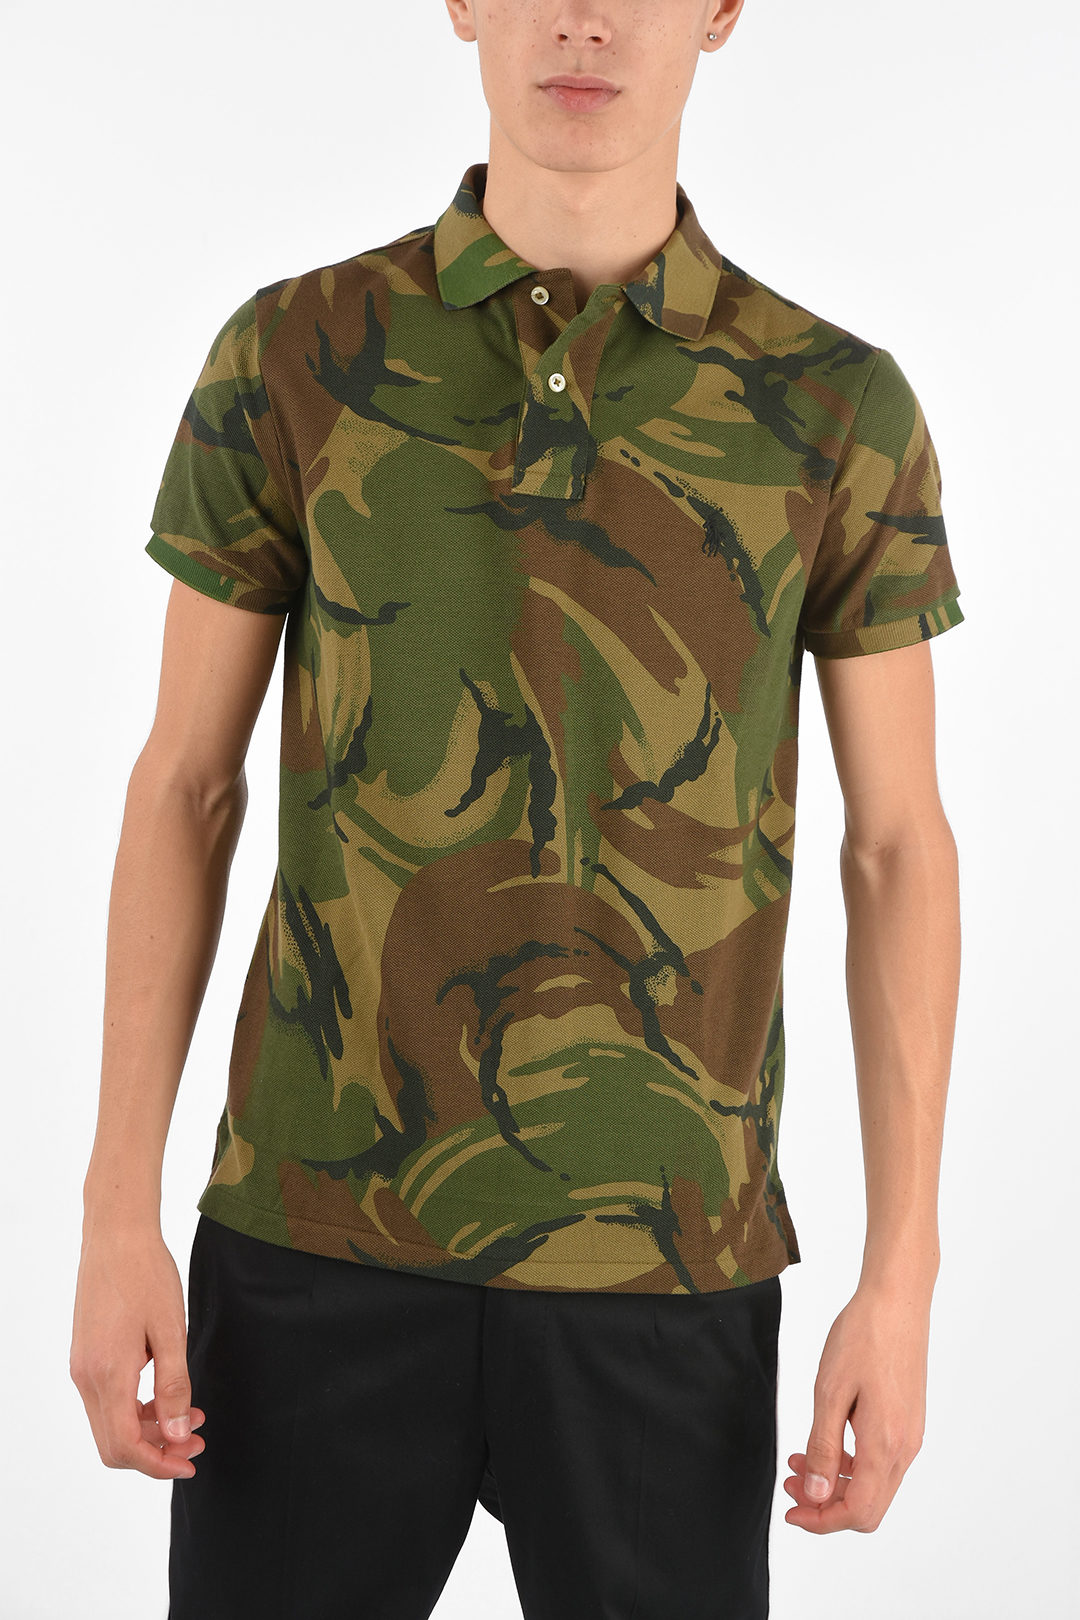 Ralph Lauren POLO Camouflage Custom Slim Fit Polo Shirt men - Glamood Outlet